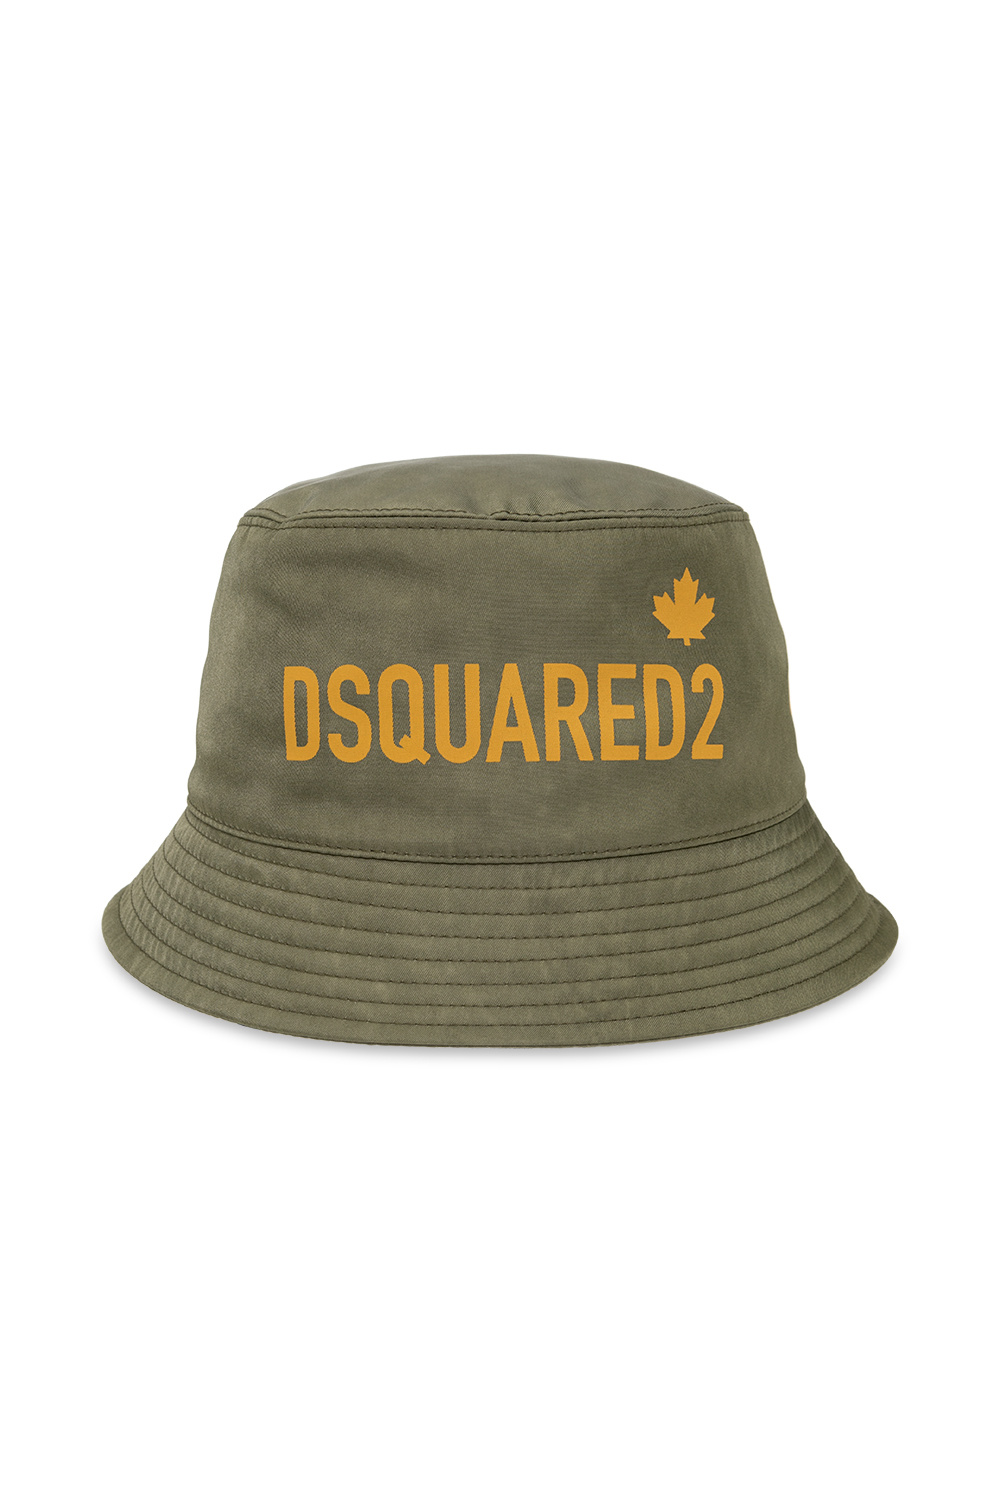 Dsquared2 ‘One Life One Planet’ collection bucket z11041 hat